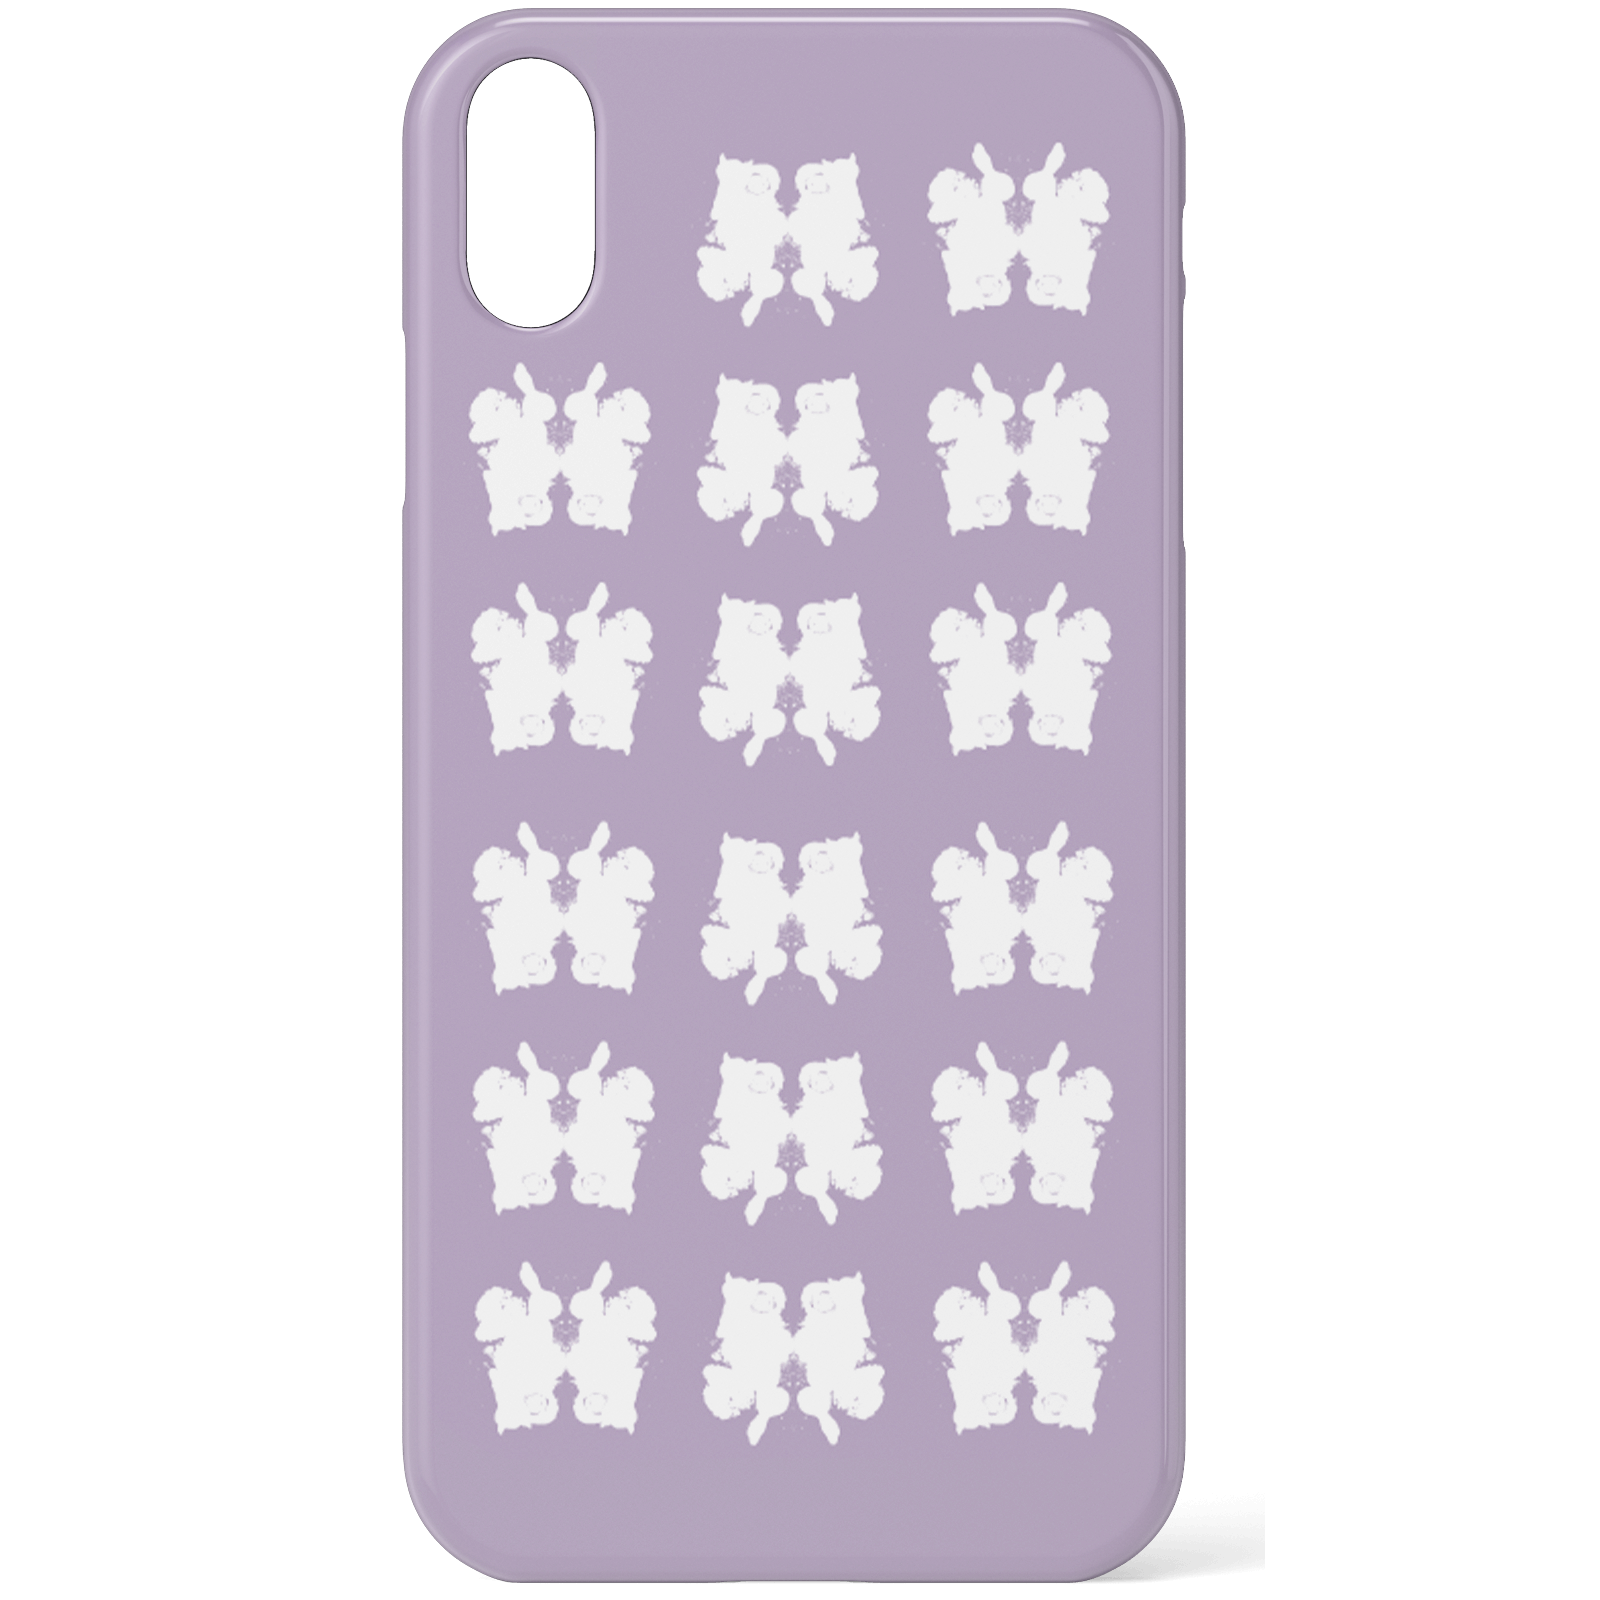 Rorschach Inkblots Purple Phone Case for iPhone and Android - iPhone 5/5s - Snap Case - Matte